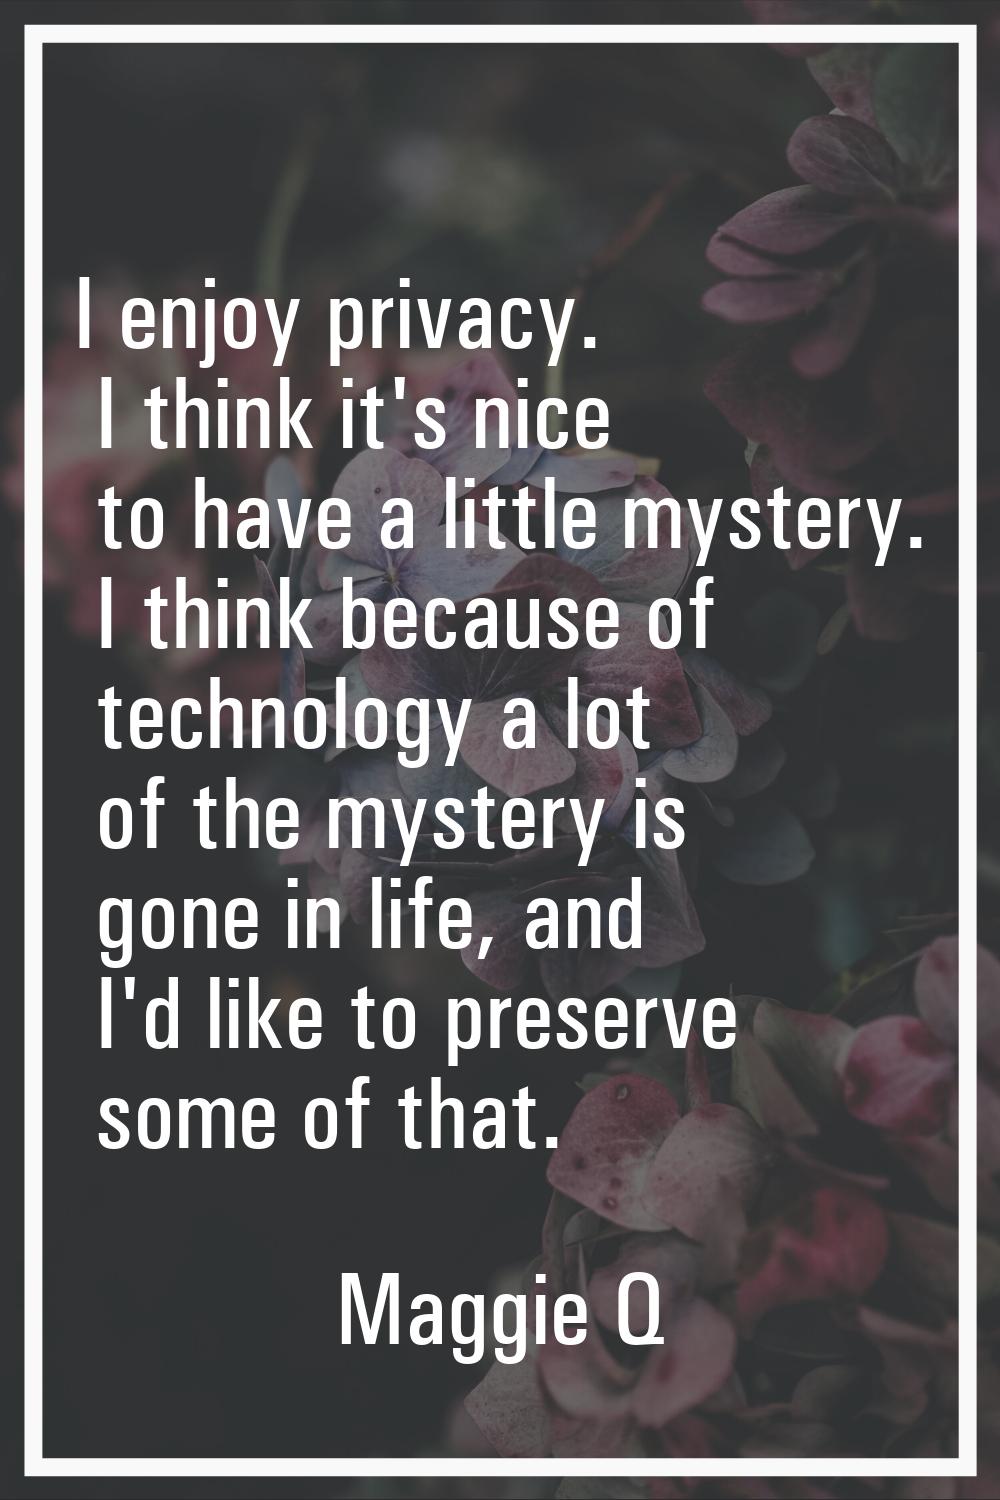 I enjoy privacy. I think it's nice to have a little mystery. I think because of technology a lot of